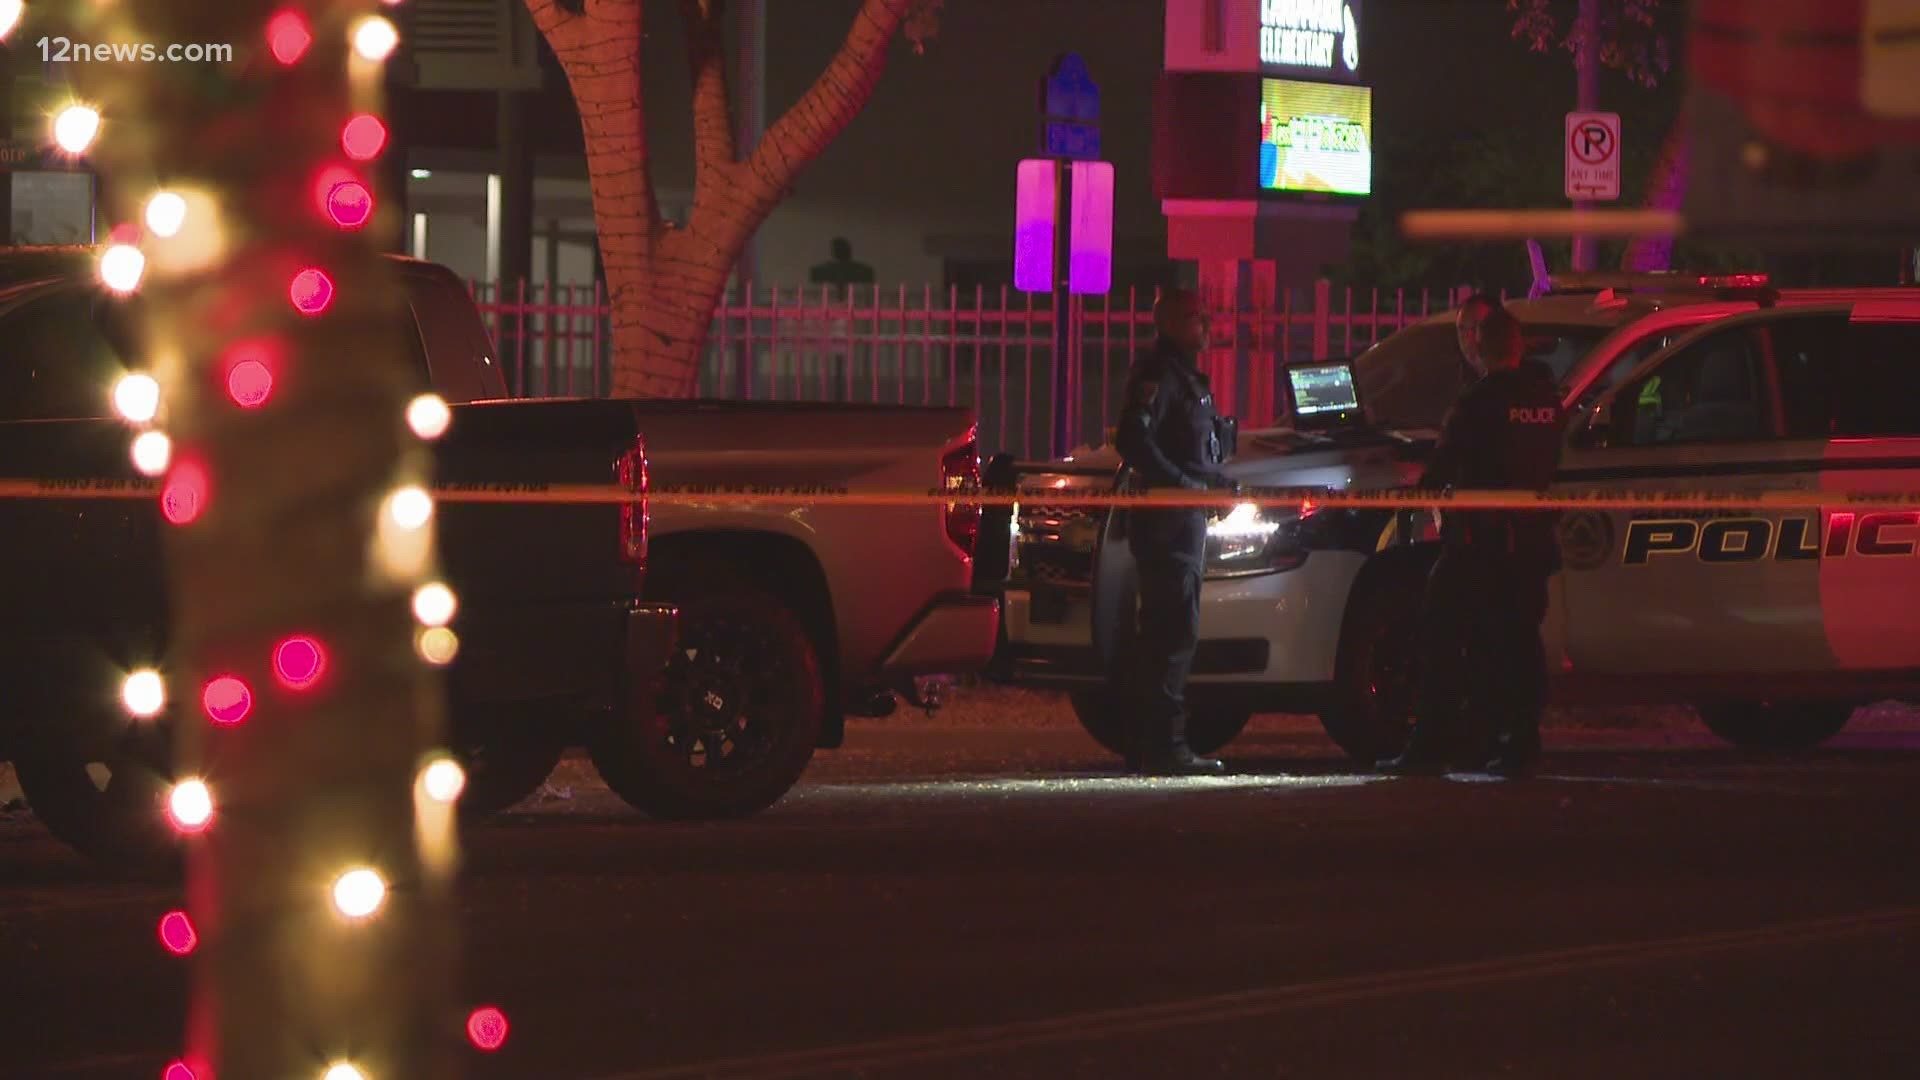 Two people were shot in a vehicle in Glendale. A woman is being treated and a man was pronounced dead.